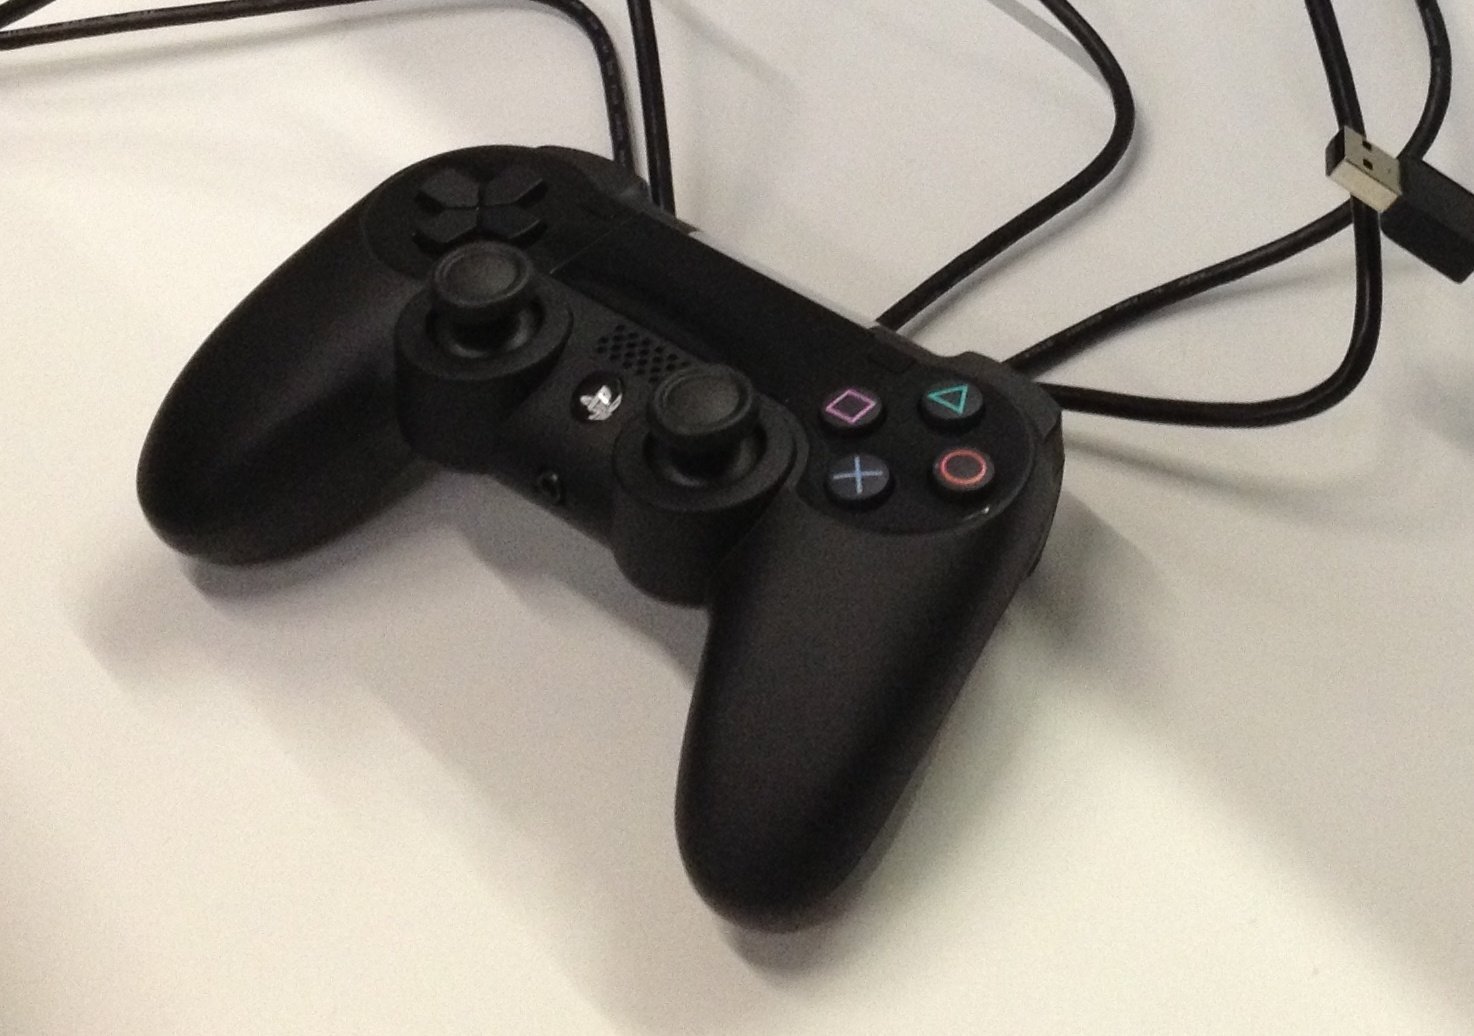 ‘Prototype’ PlayStation 4 controller pictured again